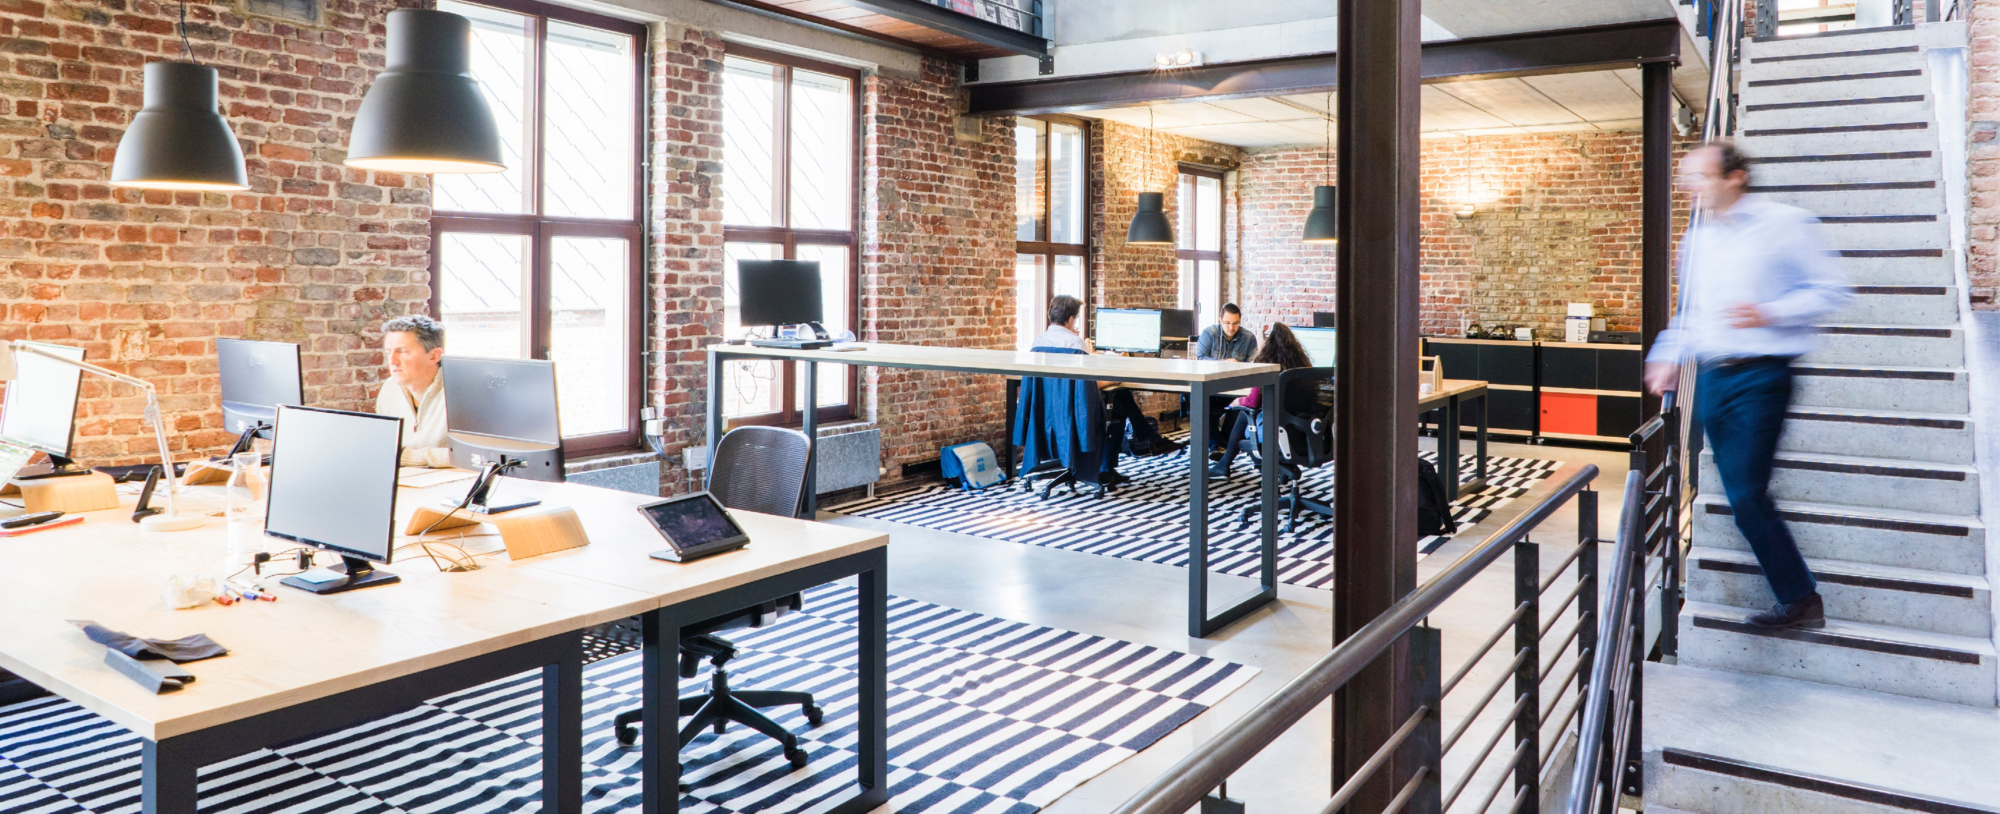 The future office- hybrid workplace